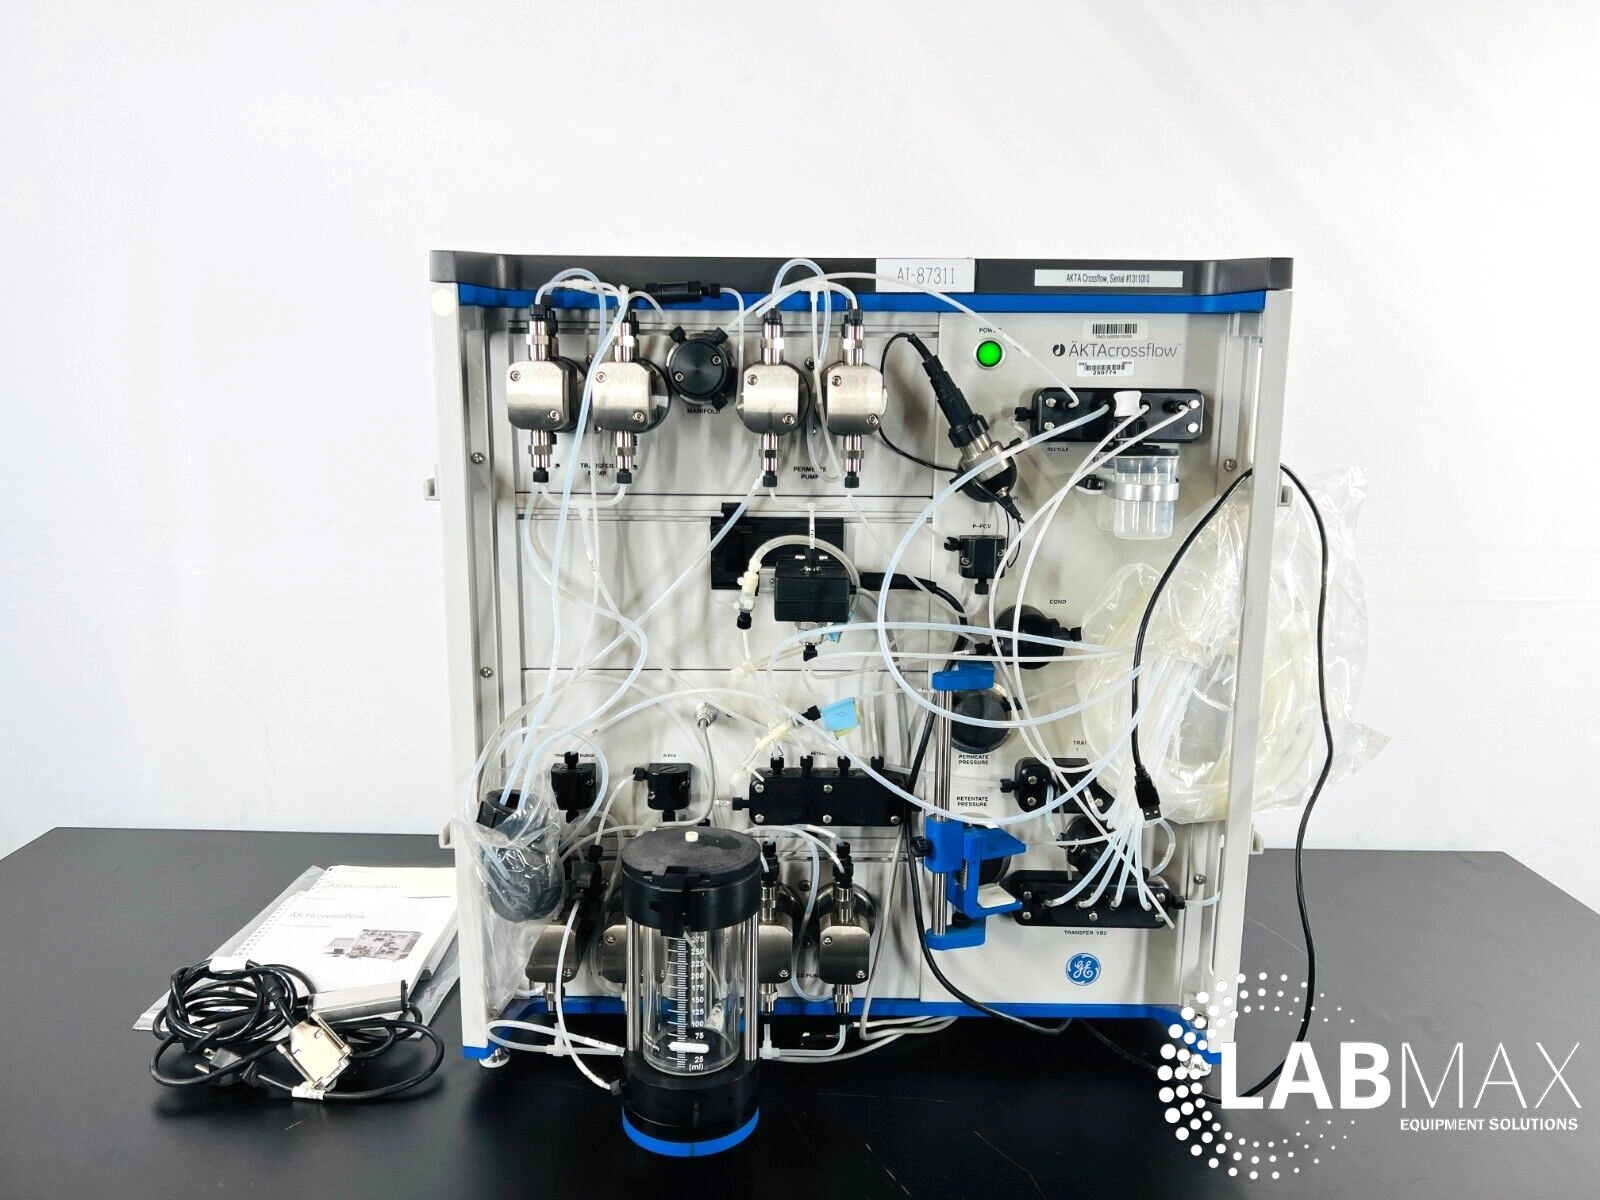 GE AKTAcrossflow Protein Purification System with 